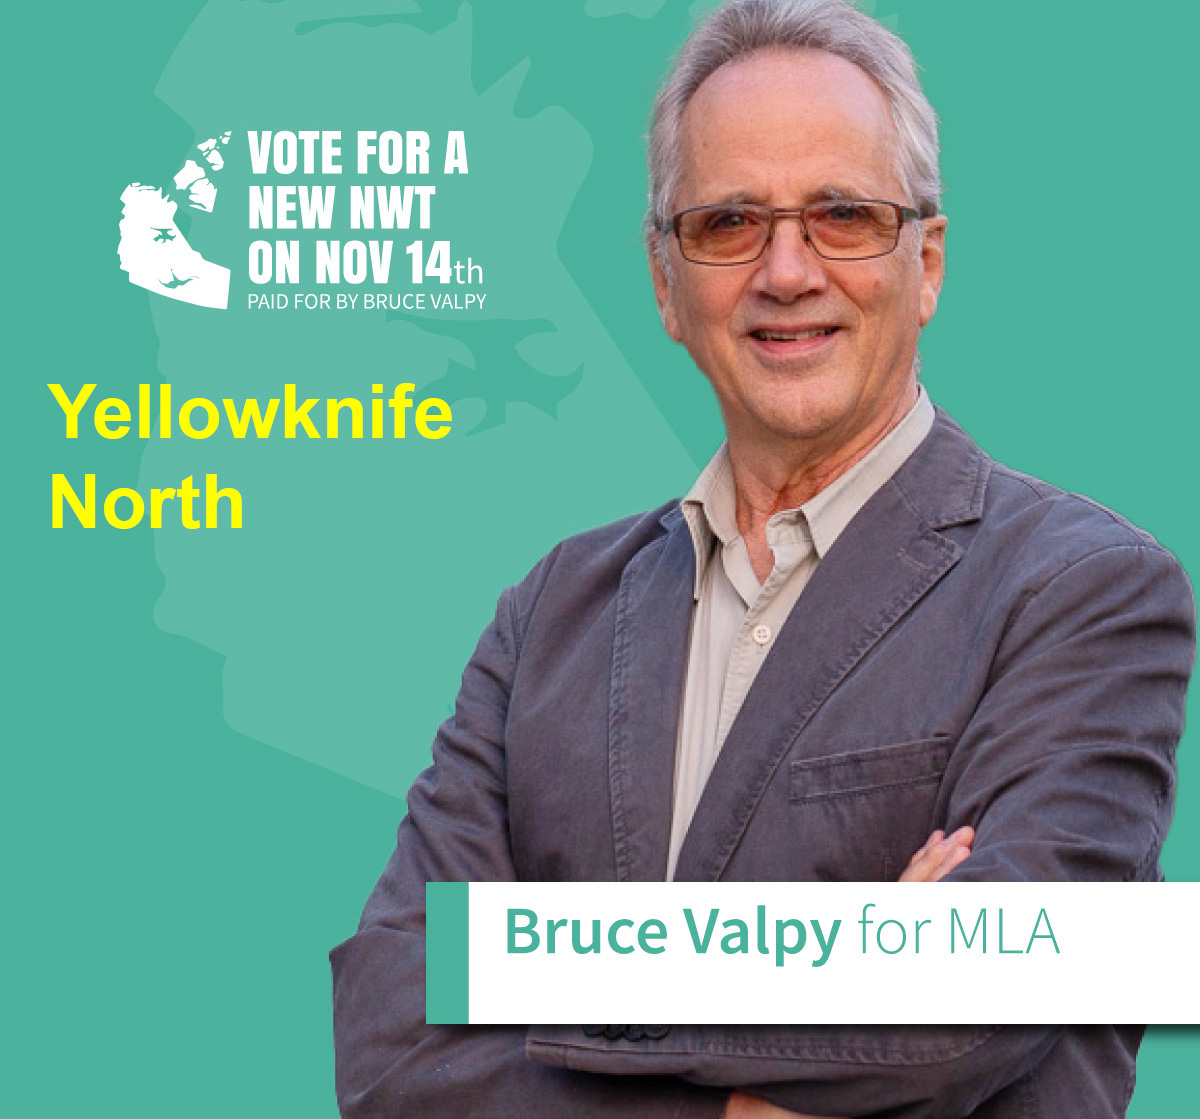 Bruce Valpy is running for MLA in Yellowknife North